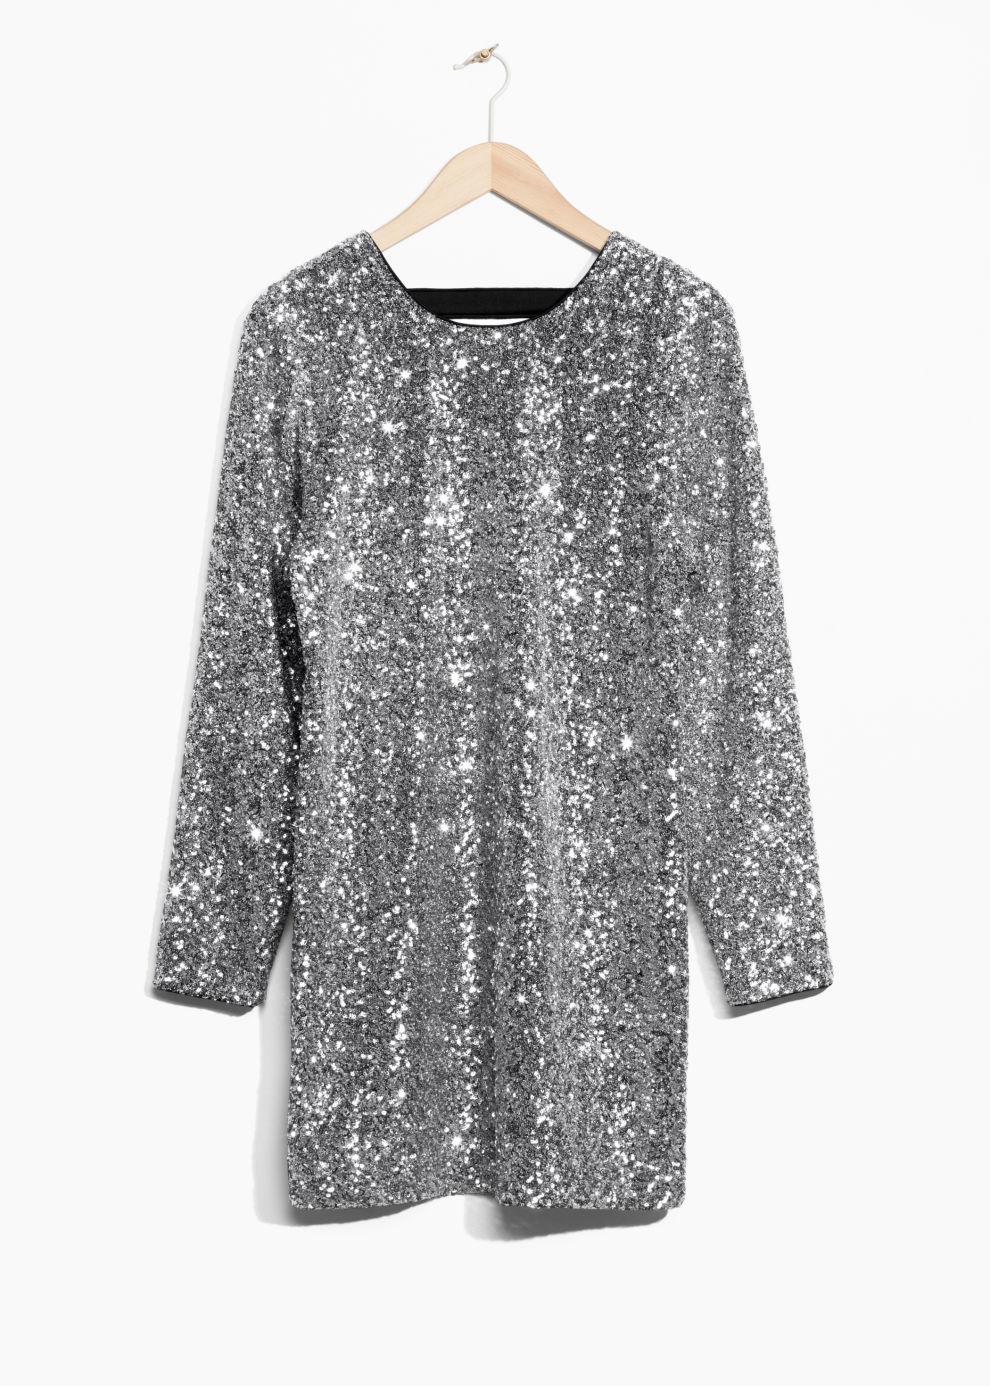 & Other Stories Sequin Dress in Grey (Gray) - Lyst